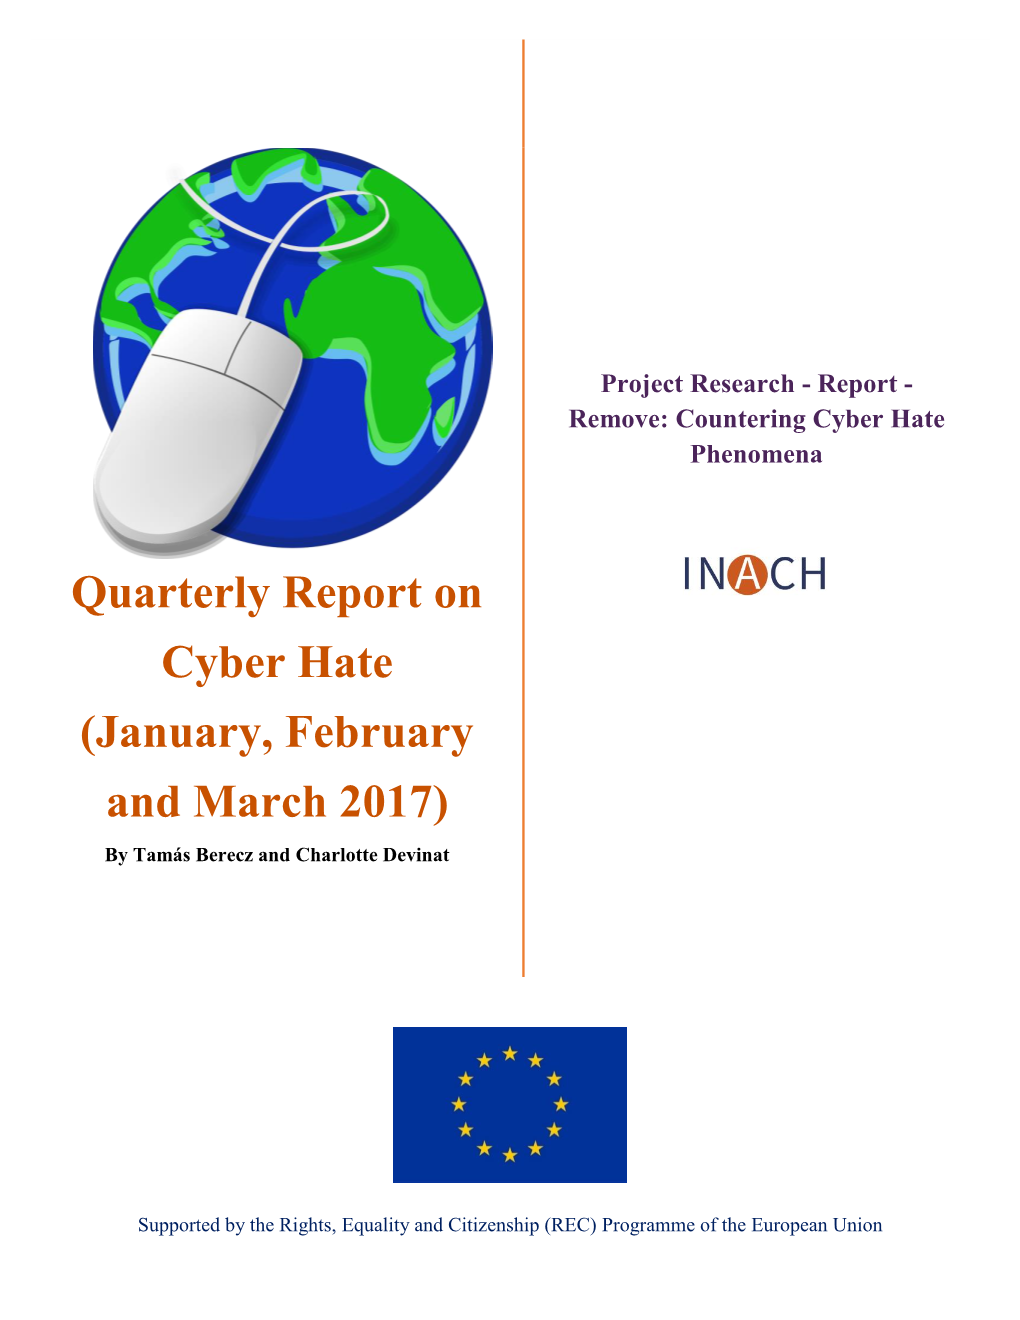 Quarterly Report on Cyber Hate (January, February and March 2017) by Tamás Berecz and Charlotte Devinat